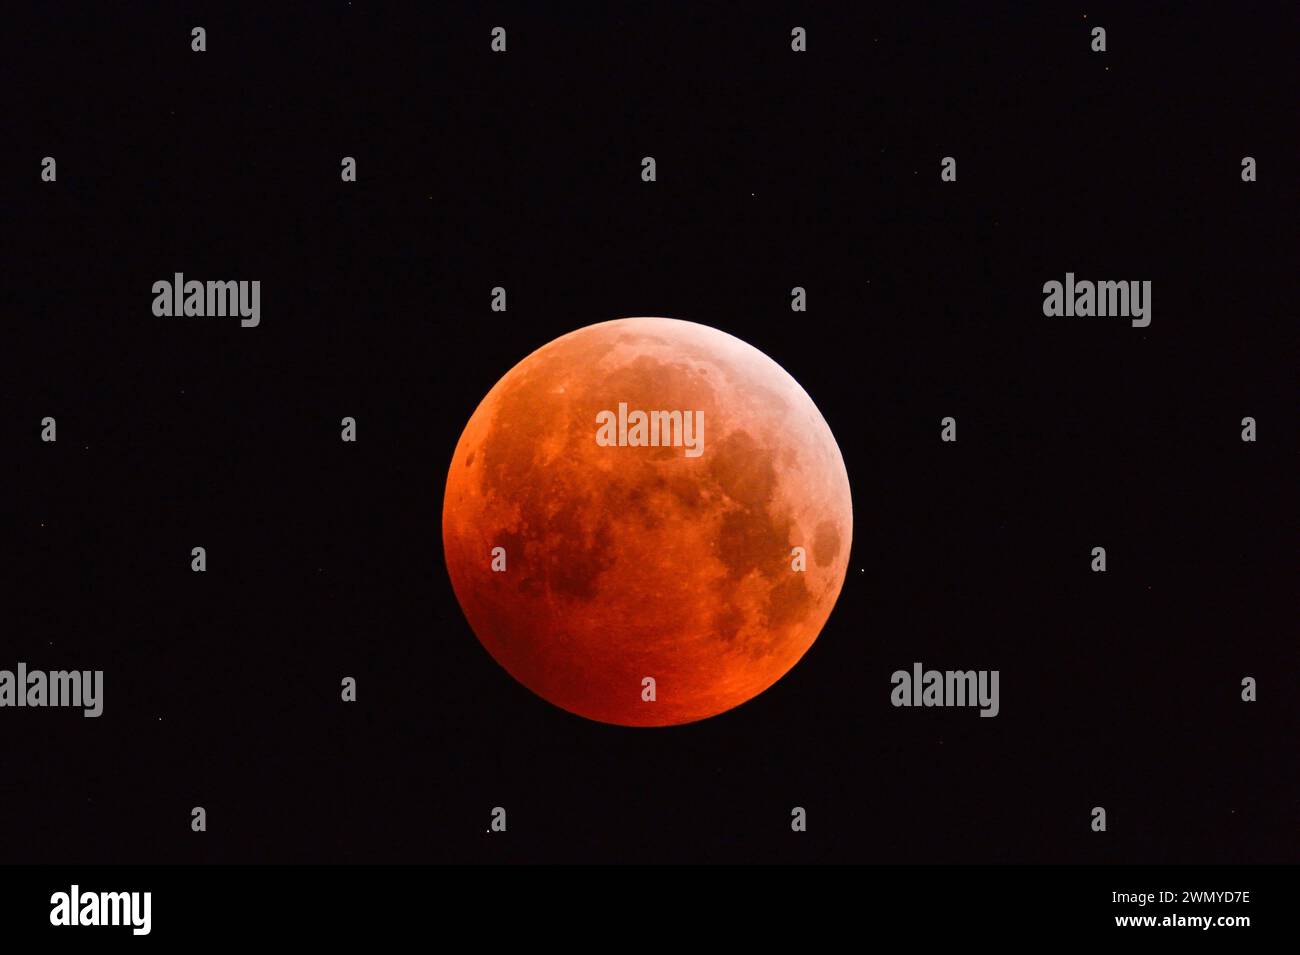 Eclipse of the super moon, lunar eclipse, red supermoon, blood moon / Blutmond, red orange full moon with sparkling stars, 21st January 2019, Germany. Stock Photo